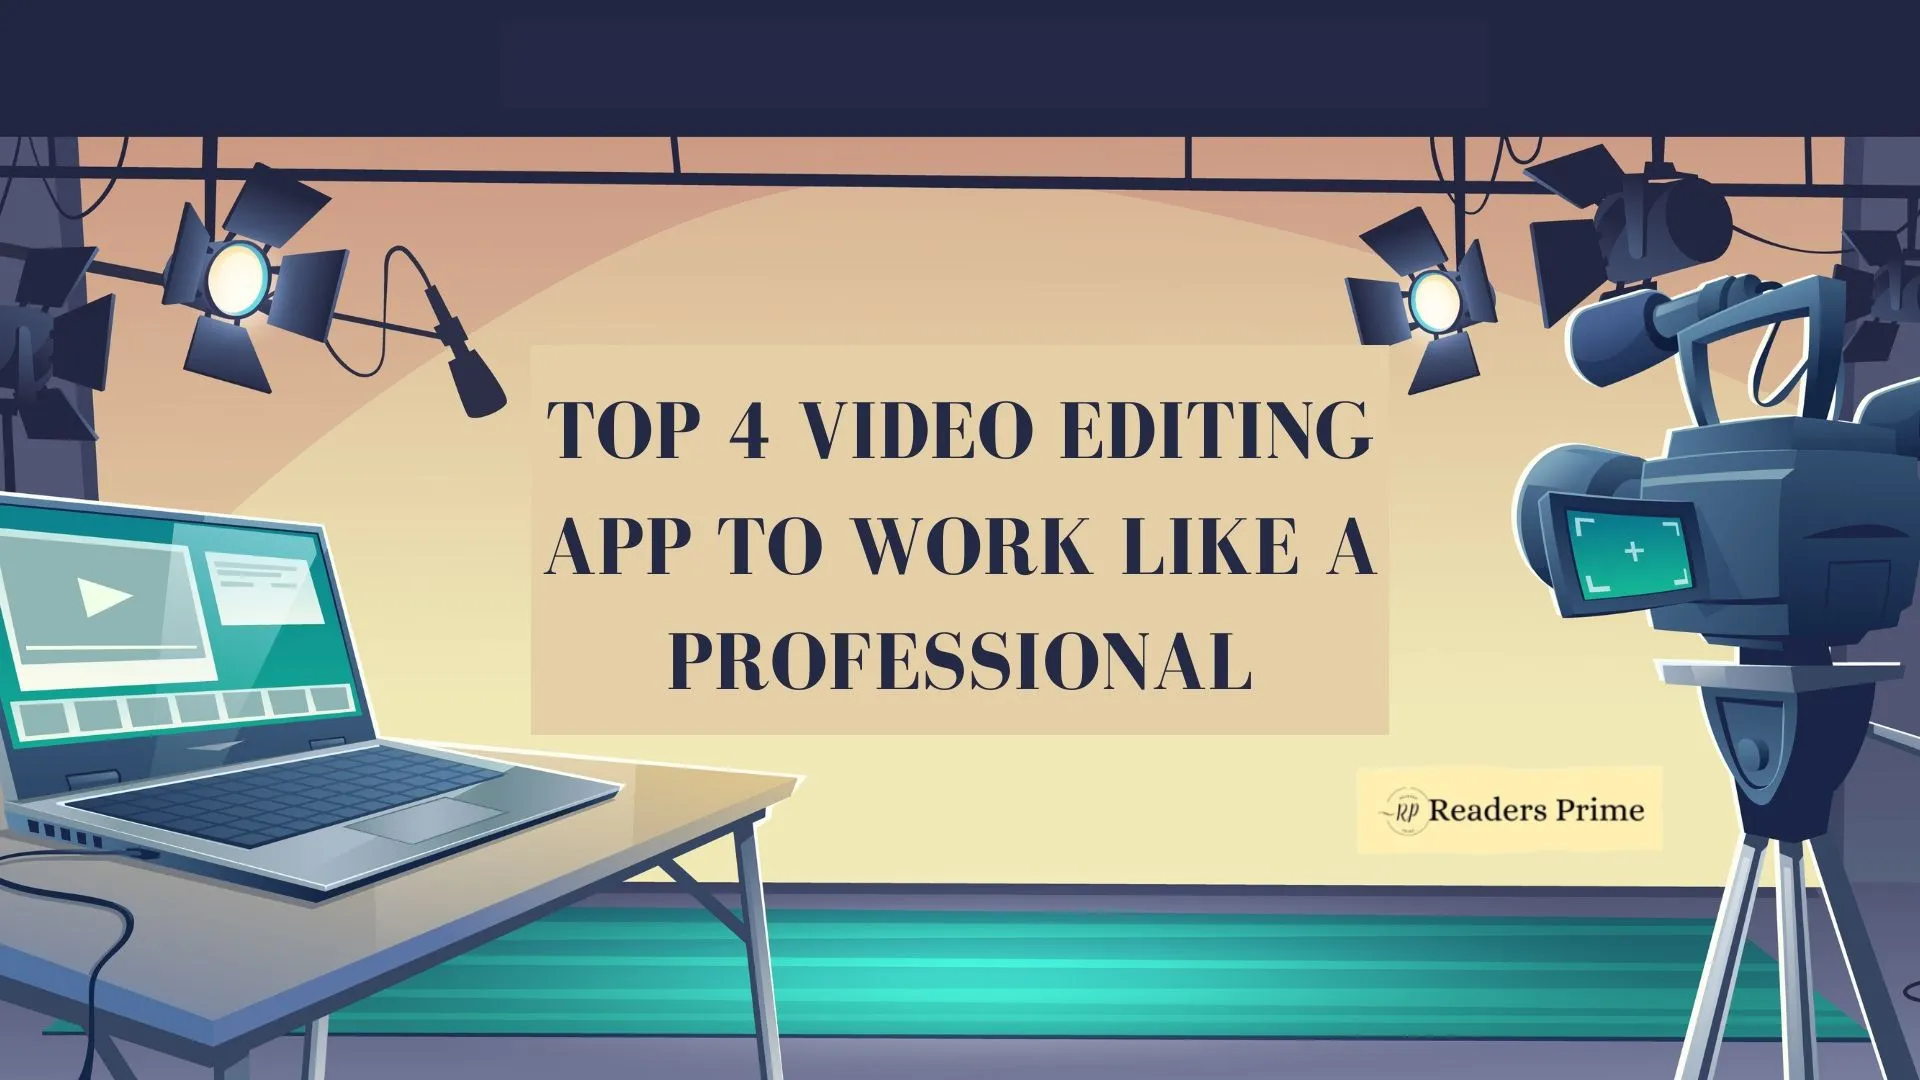 Top 4 PC Video Editing apps to Work Like a Professional